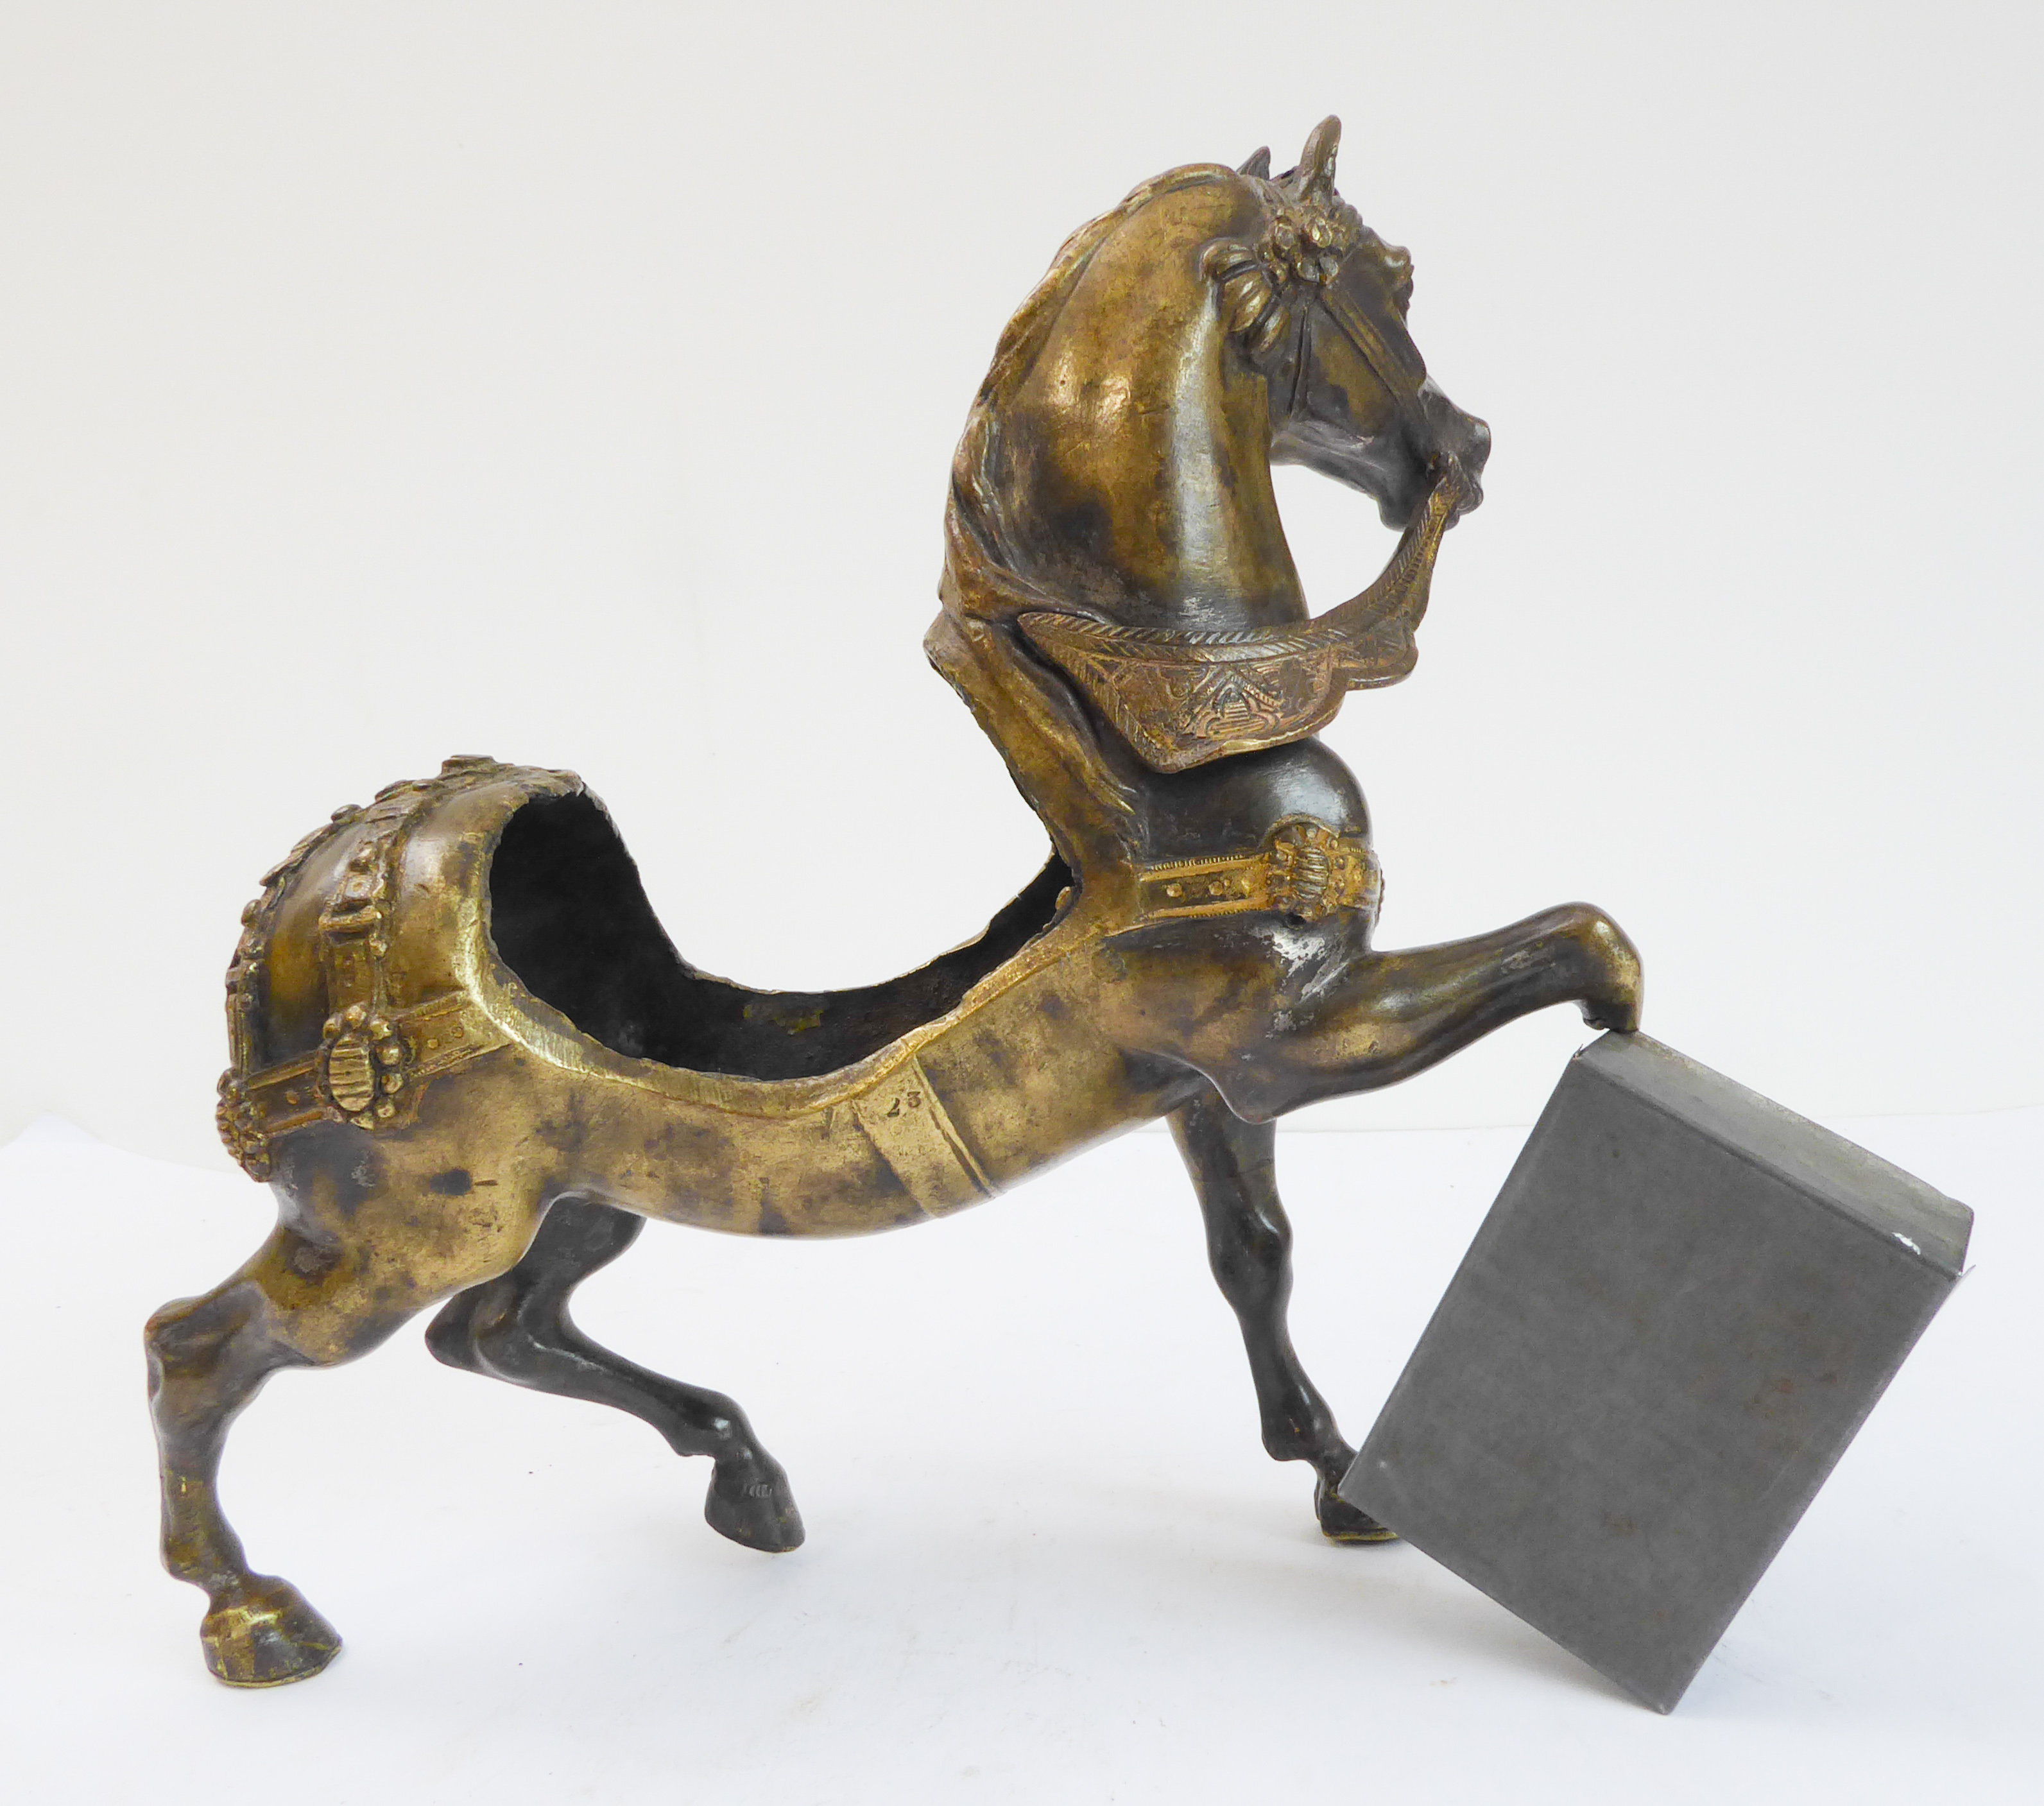 A bronze sculpture of a horse with decorative cast harness and open saddle section (saddle, leg - Image 2 of 4